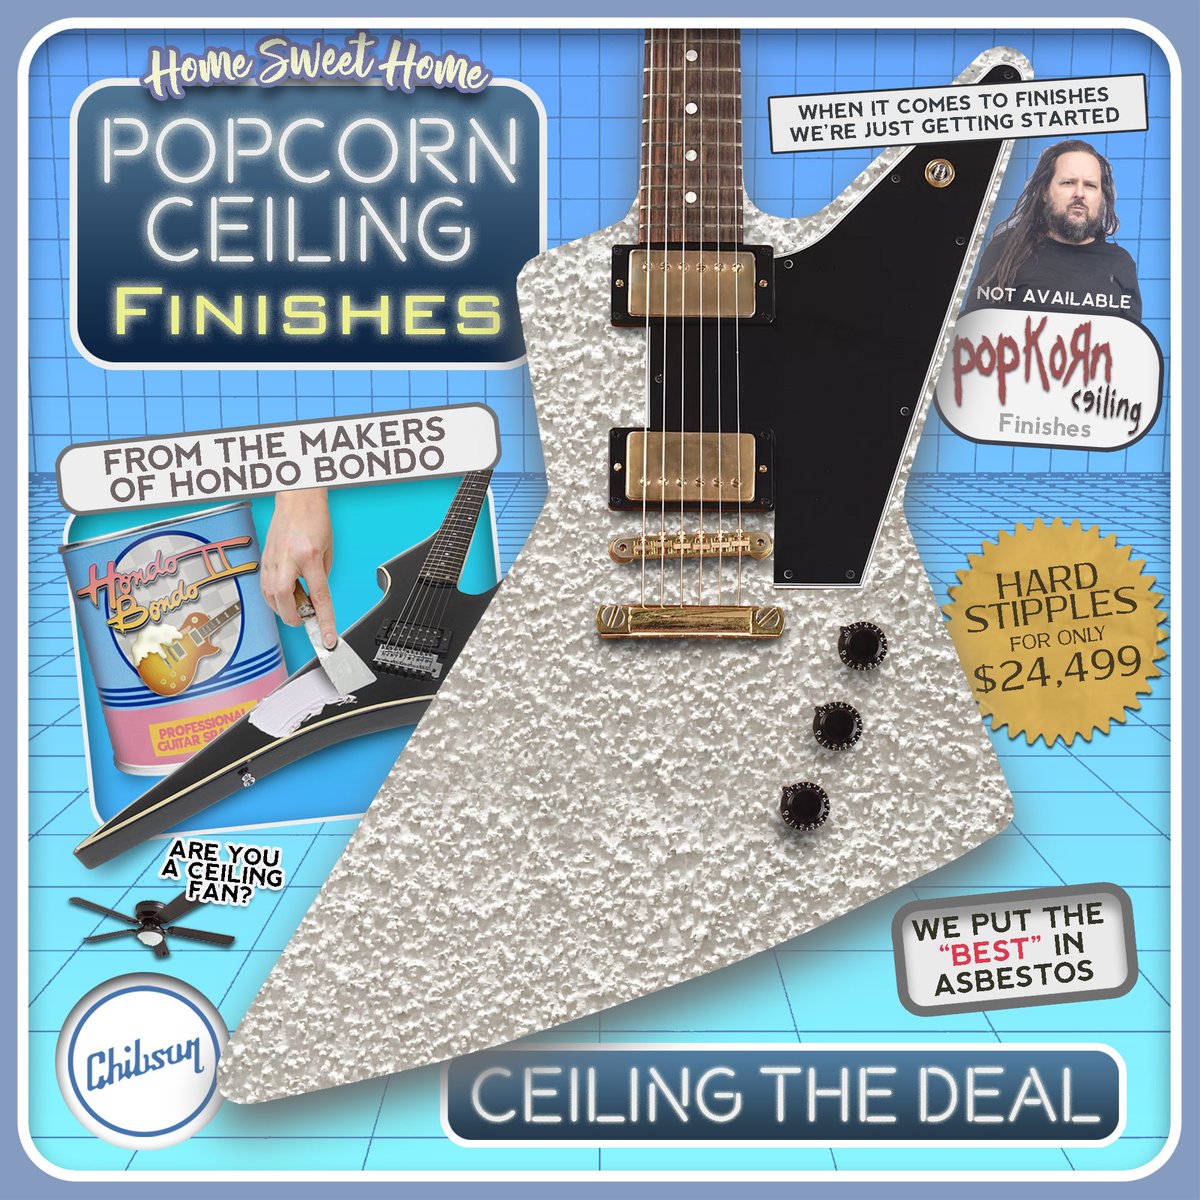 More Than A Ceiling 

#chibson #chib #chibs #chibi #gear #gearybusey #guitar #guitars #popcornceiling #stipple #ceiling #onlyachibsonisgoodenough